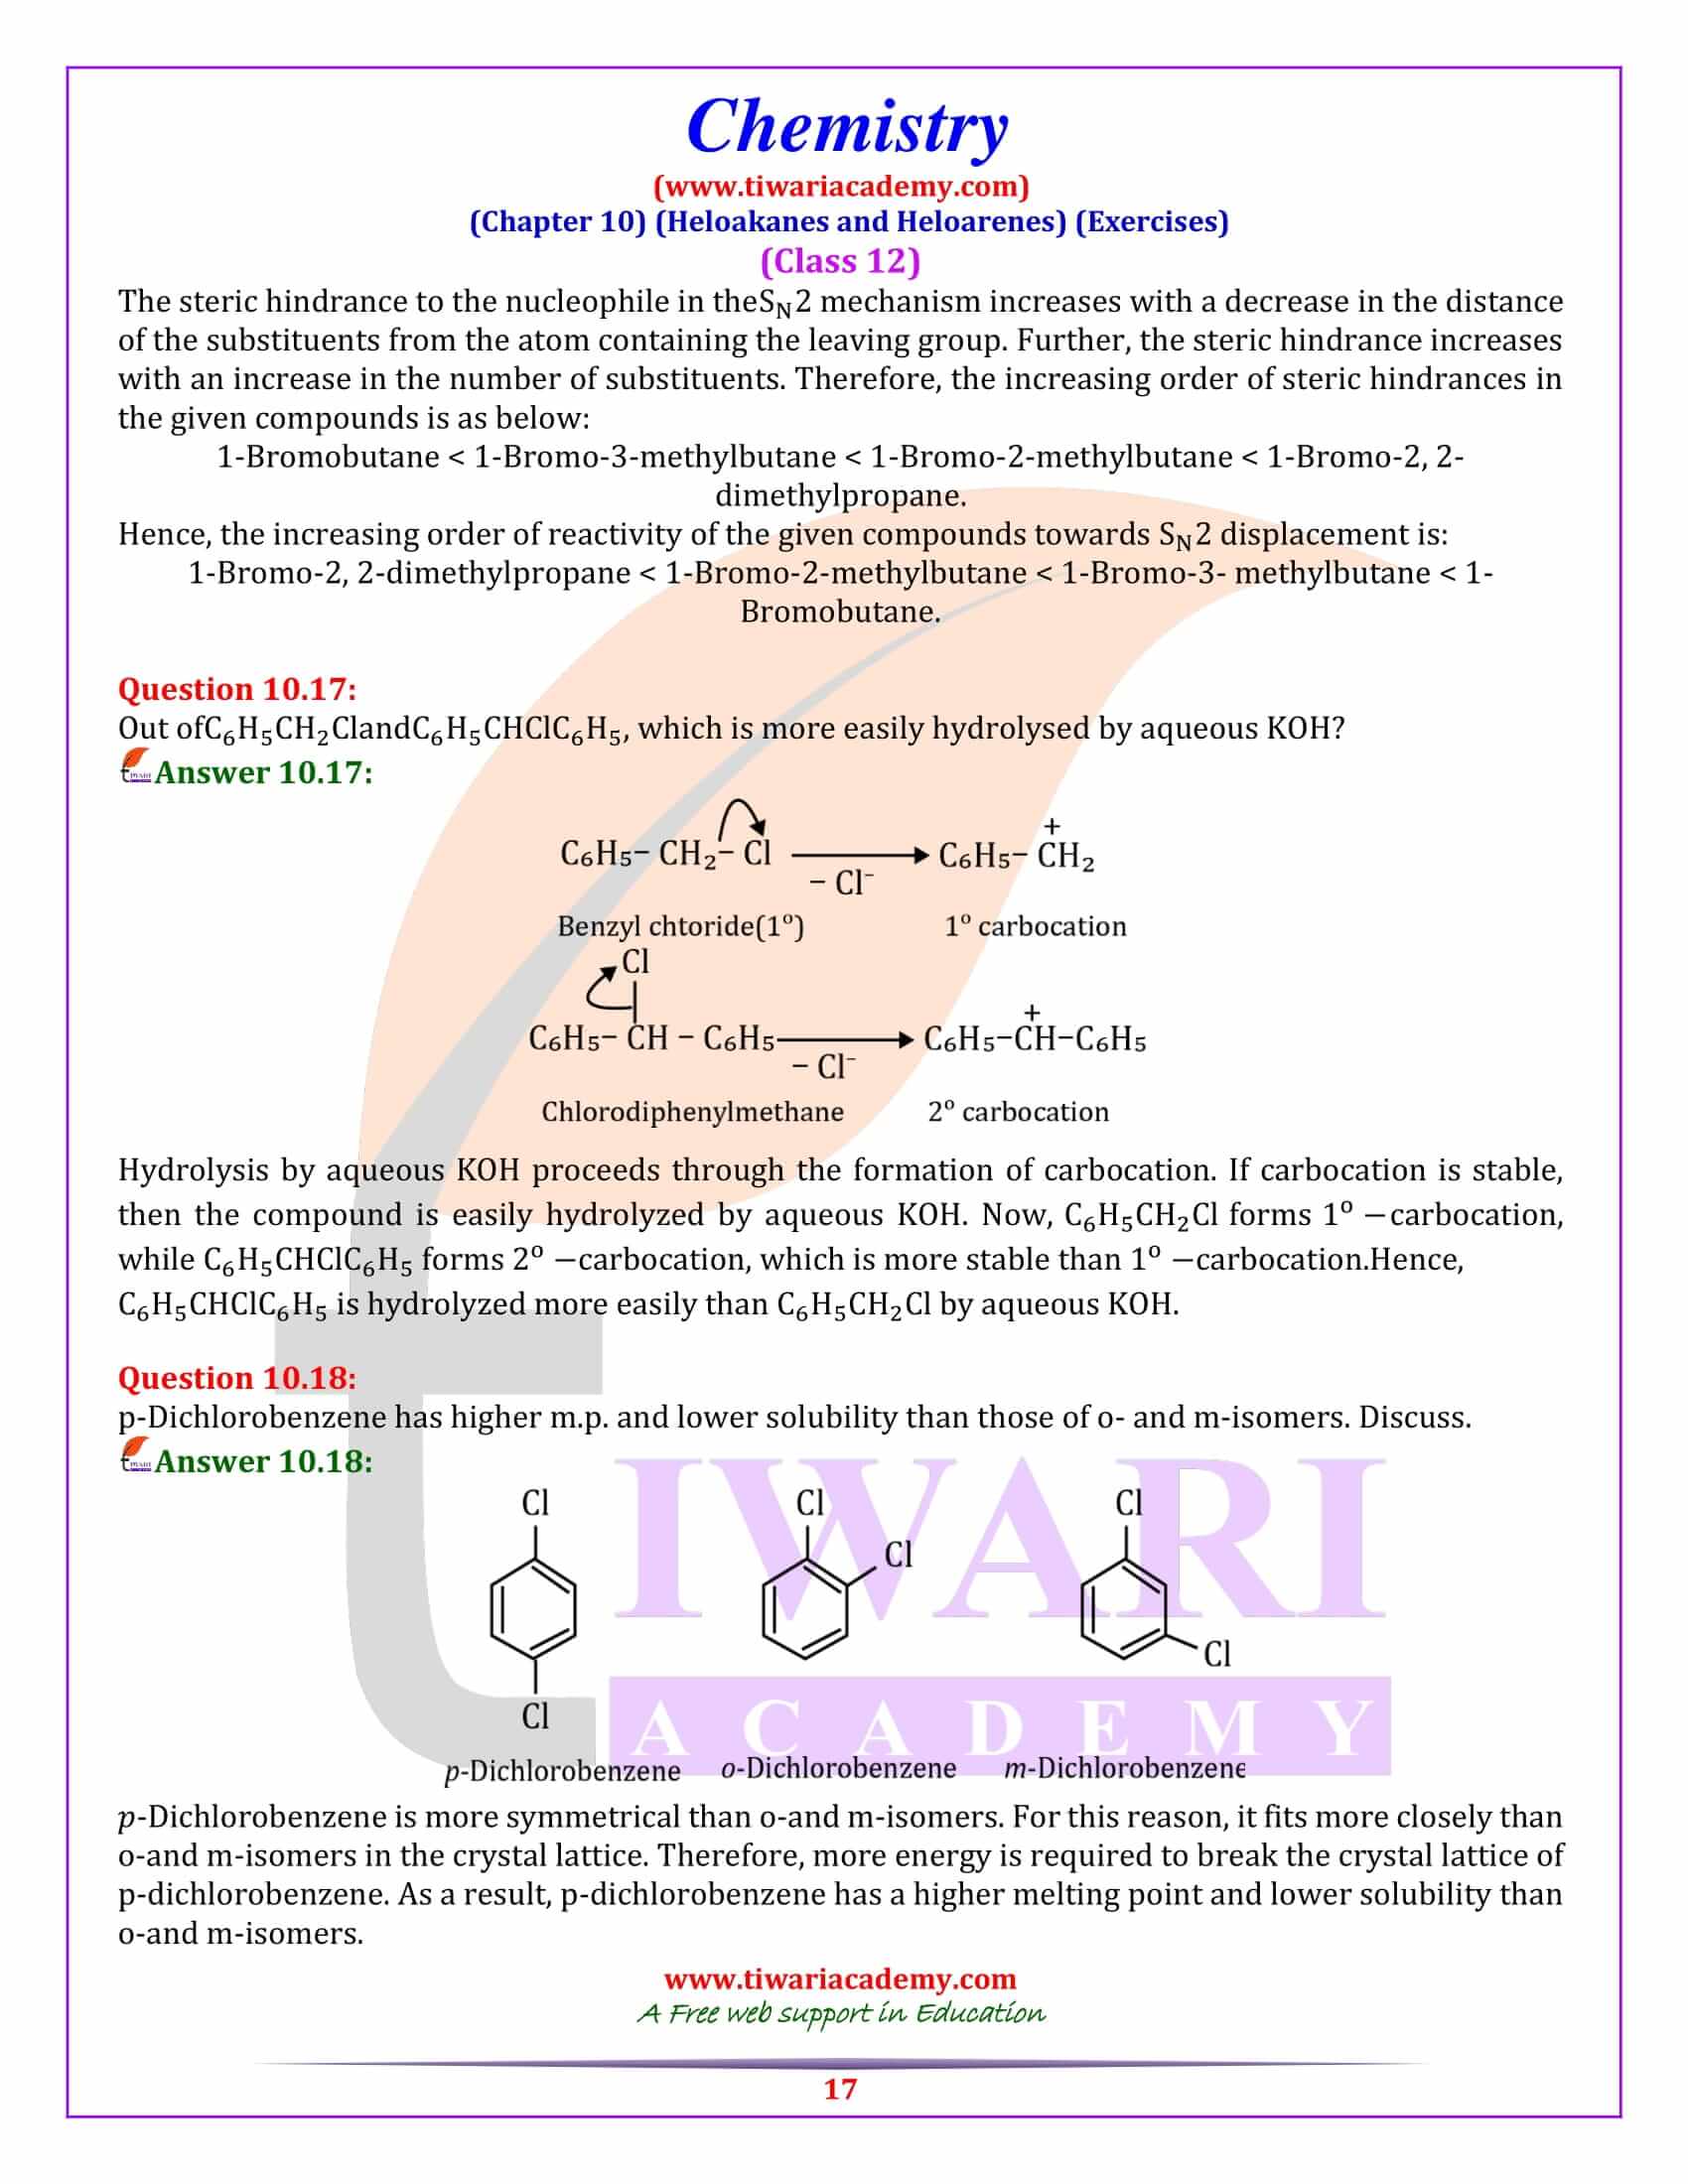 NCERT Solutions for Class 12 Chemistry Chapter 10 all ques ans